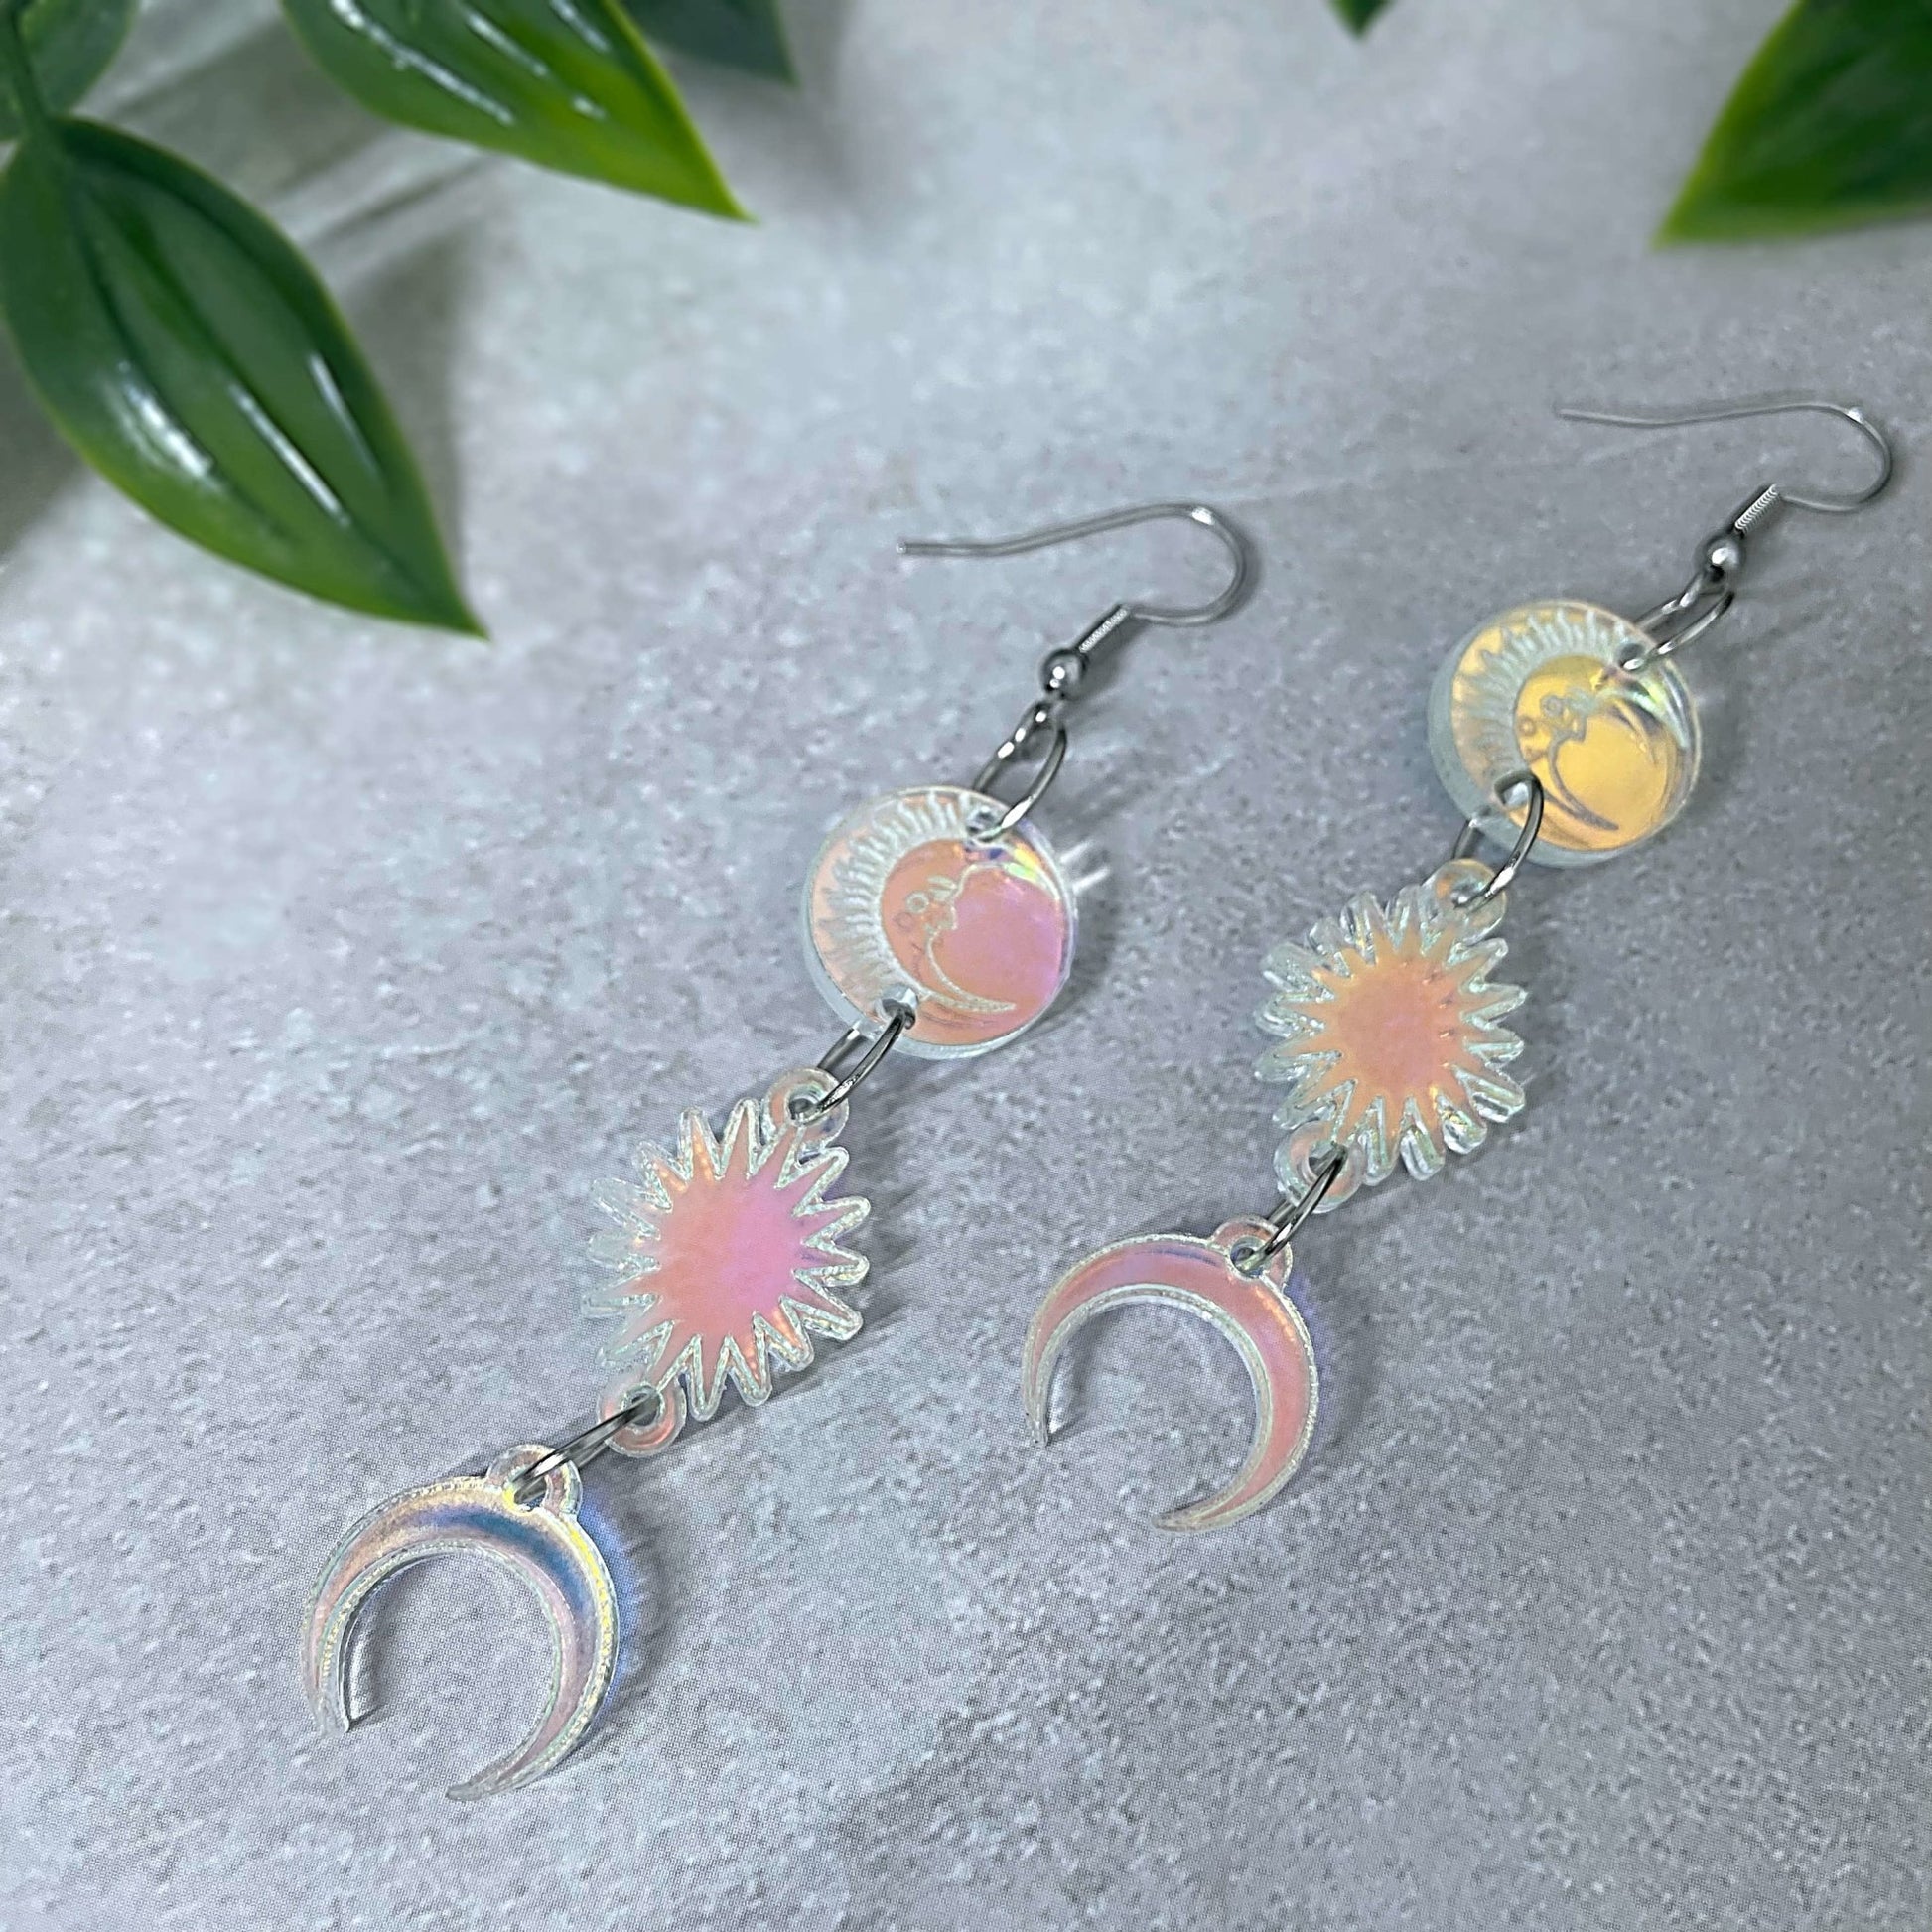 Celestial Drop Earrings - Lost Minds Clothing